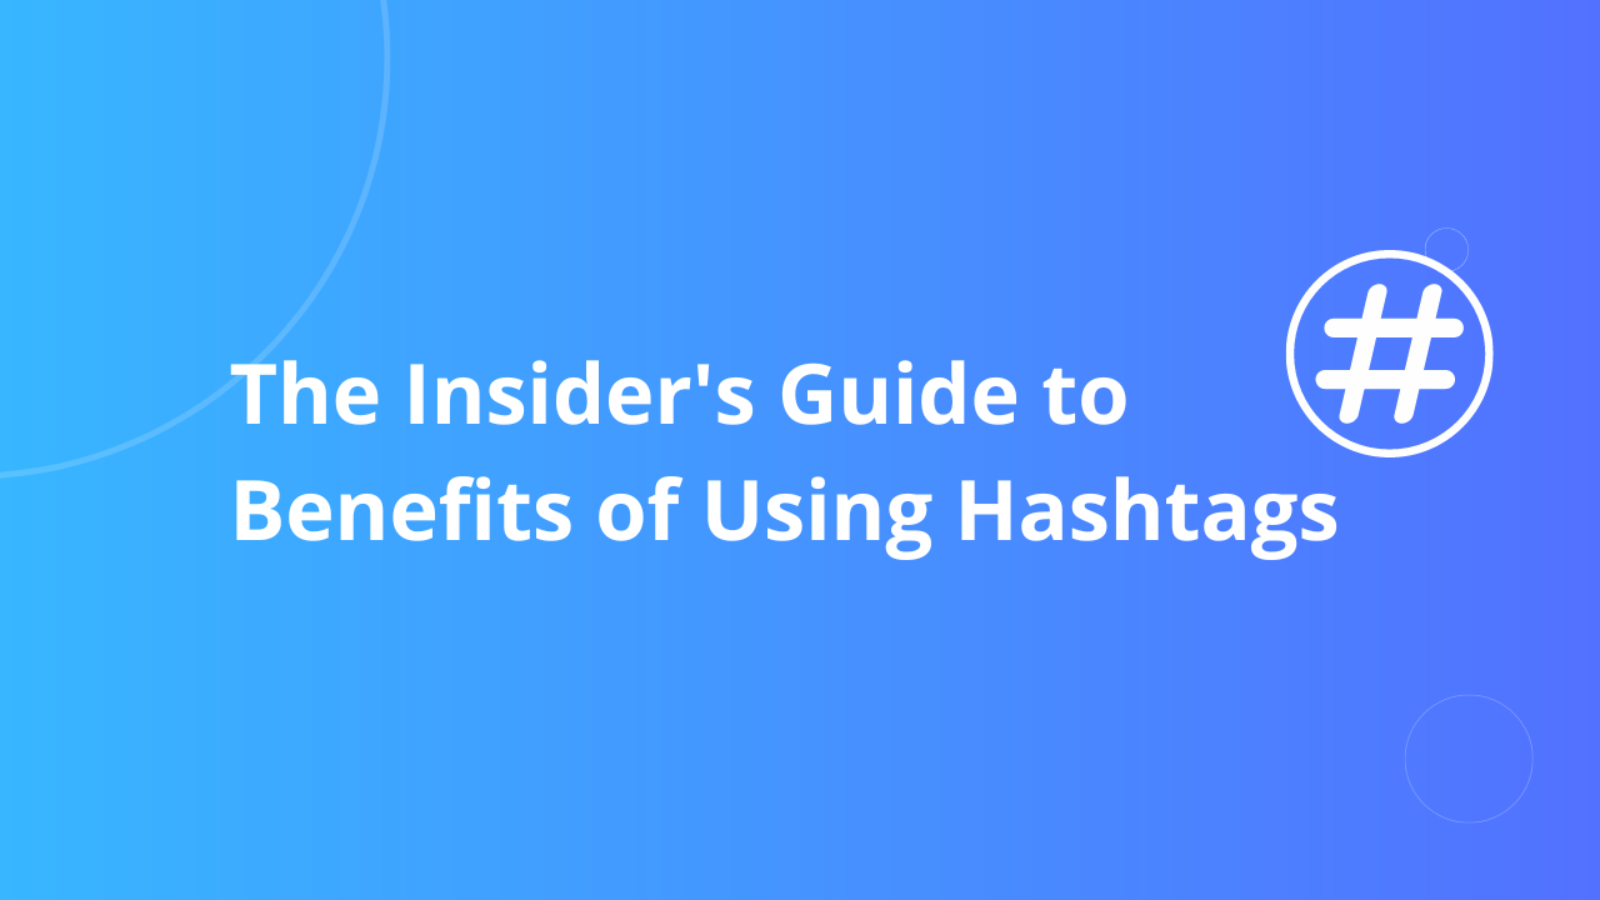 The Insider’s Guide to Benefits of Using Hashtags